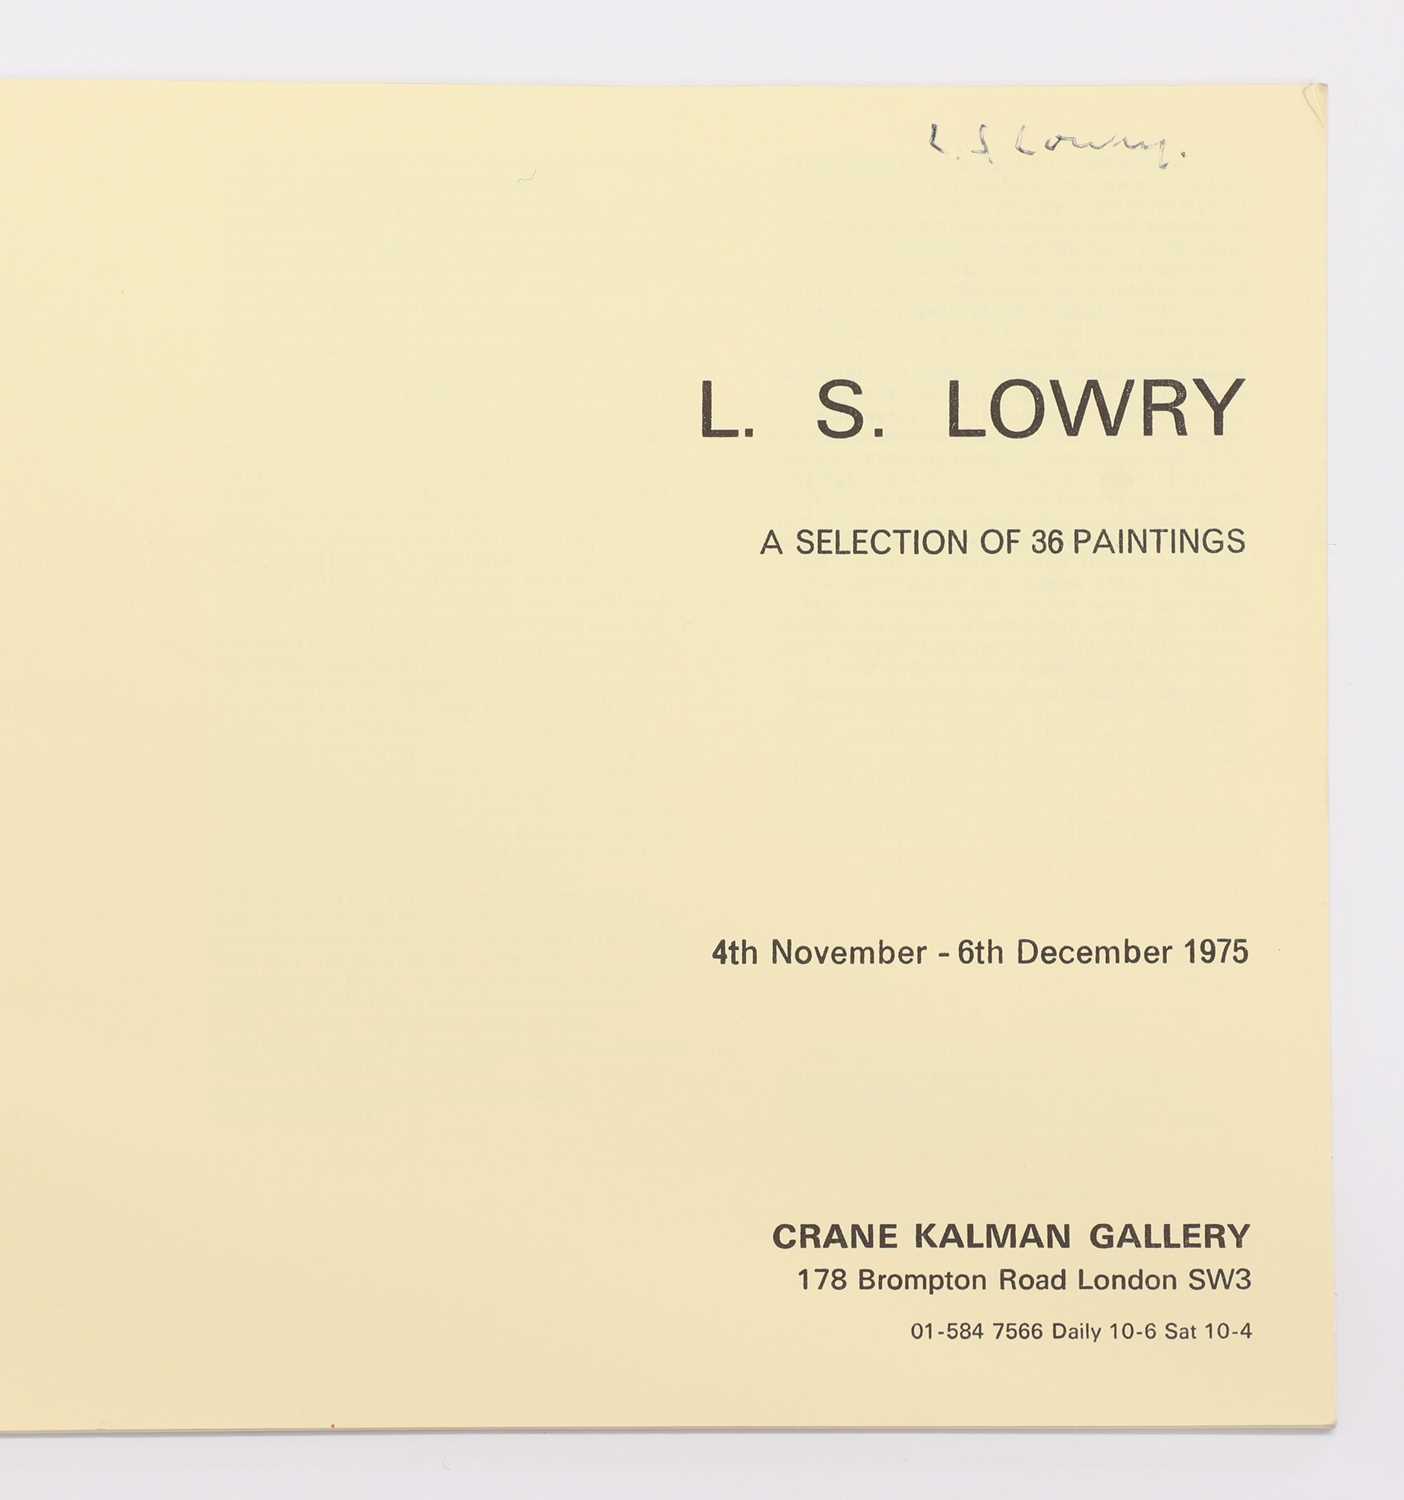 Lot 274 - Signed exhibition catalogue